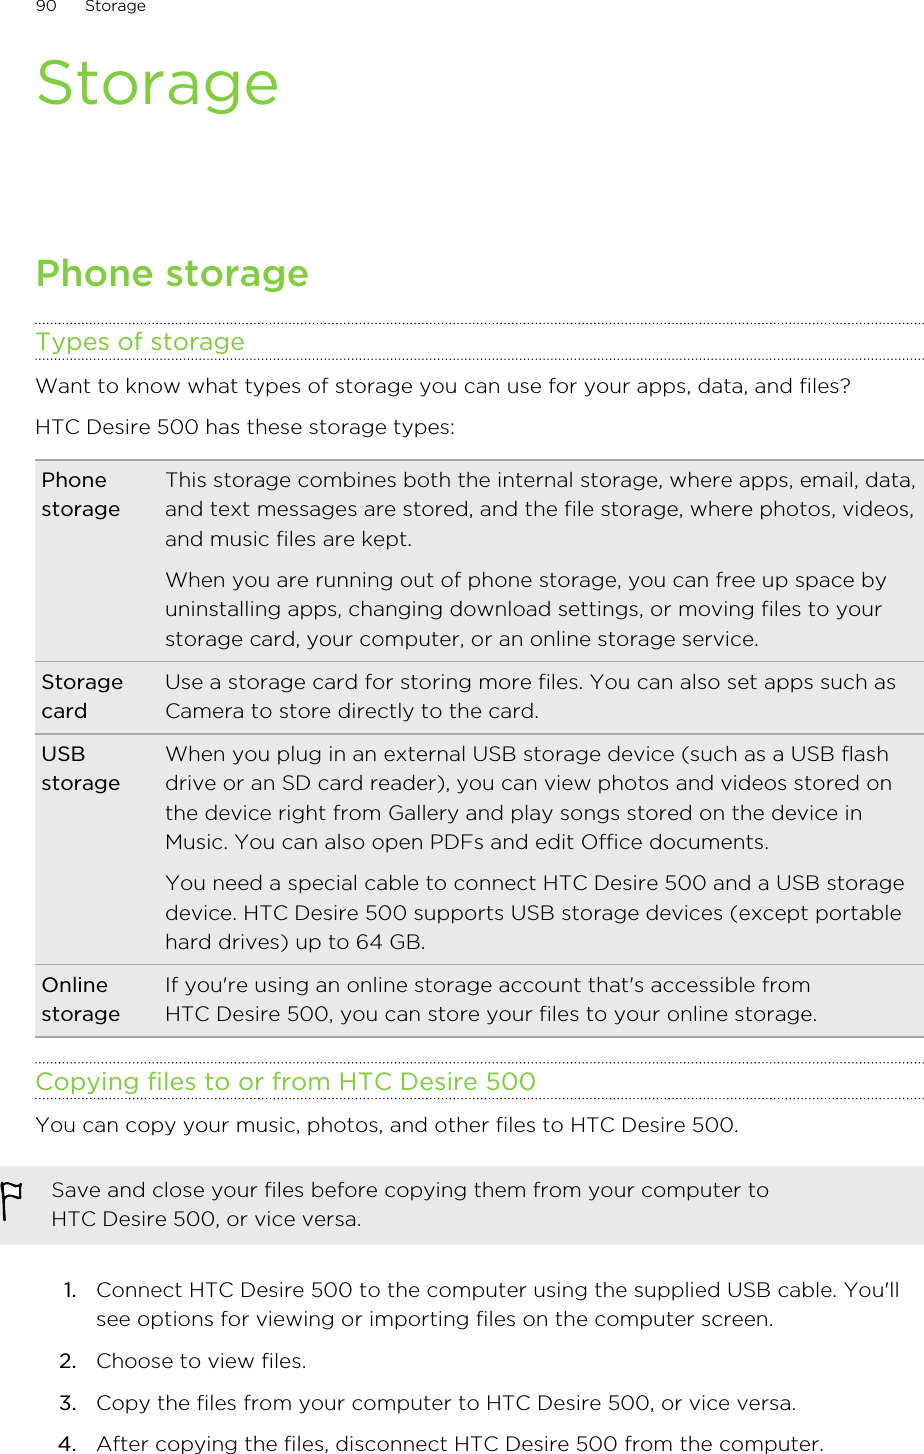 StoragePhone storageTypes of storageWant to know what types of storage you can use for your apps, data, and files?HTC Desire 500 has these storage types:PhonestorageThis storage combines both the internal storage, where apps, email, data,and text messages are stored, and the file storage, where photos, videos,and music files are kept.When you are running out of phone storage, you can free up space byuninstalling apps, changing download settings, or moving files to yourstorage card, your computer, or an online storage service.StoragecardUse a storage card for storing more files. You can also set apps such asCamera to store directly to the card.USBstorageWhen you plug in an external USB storage device (such as a USB flashdrive or an SD card reader), you can view photos and videos stored onthe device right from Gallery and play songs stored on the device inMusic. You can also open PDFs and edit Office documents.You need a special cable to connect HTC Desire 500 and a USB storagedevice. HTC Desire 500 supports USB storage devices (except portablehard drives) up to 64 GB.OnlinestorageIf you&apos;re using an online storage account that&apos;s accessible fromHTC Desire 500, you can store your files to your online storage.Copying files to or from HTC Desire 500You can copy your music, photos, and other files to HTC Desire 500.Save and close your files before copying them from your computer toHTC Desire 500, or vice versa.1. Connect HTC Desire 500 to the computer using the supplied USB cable. You&apos;llsee options for viewing or importing files on the computer screen.2. Choose to view files.3. Copy the files from your computer to HTC Desire 500, or vice versa.4. After copying the files, disconnect HTC Desire 500 from the computer.90 Storage